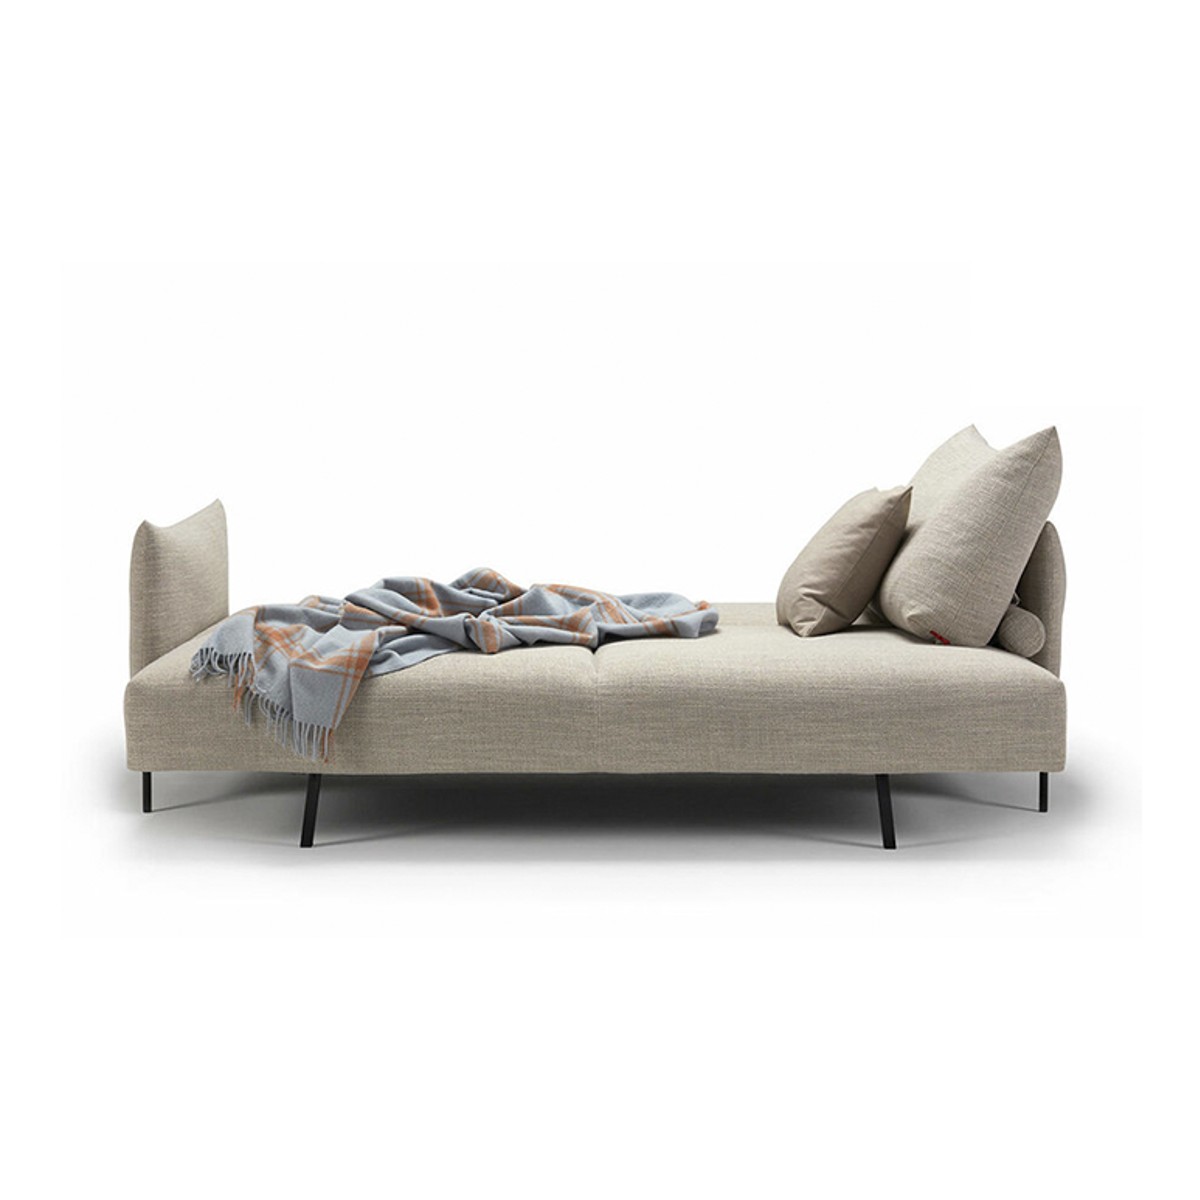 Malloy Sleek Excess Queen Sofa Bed By